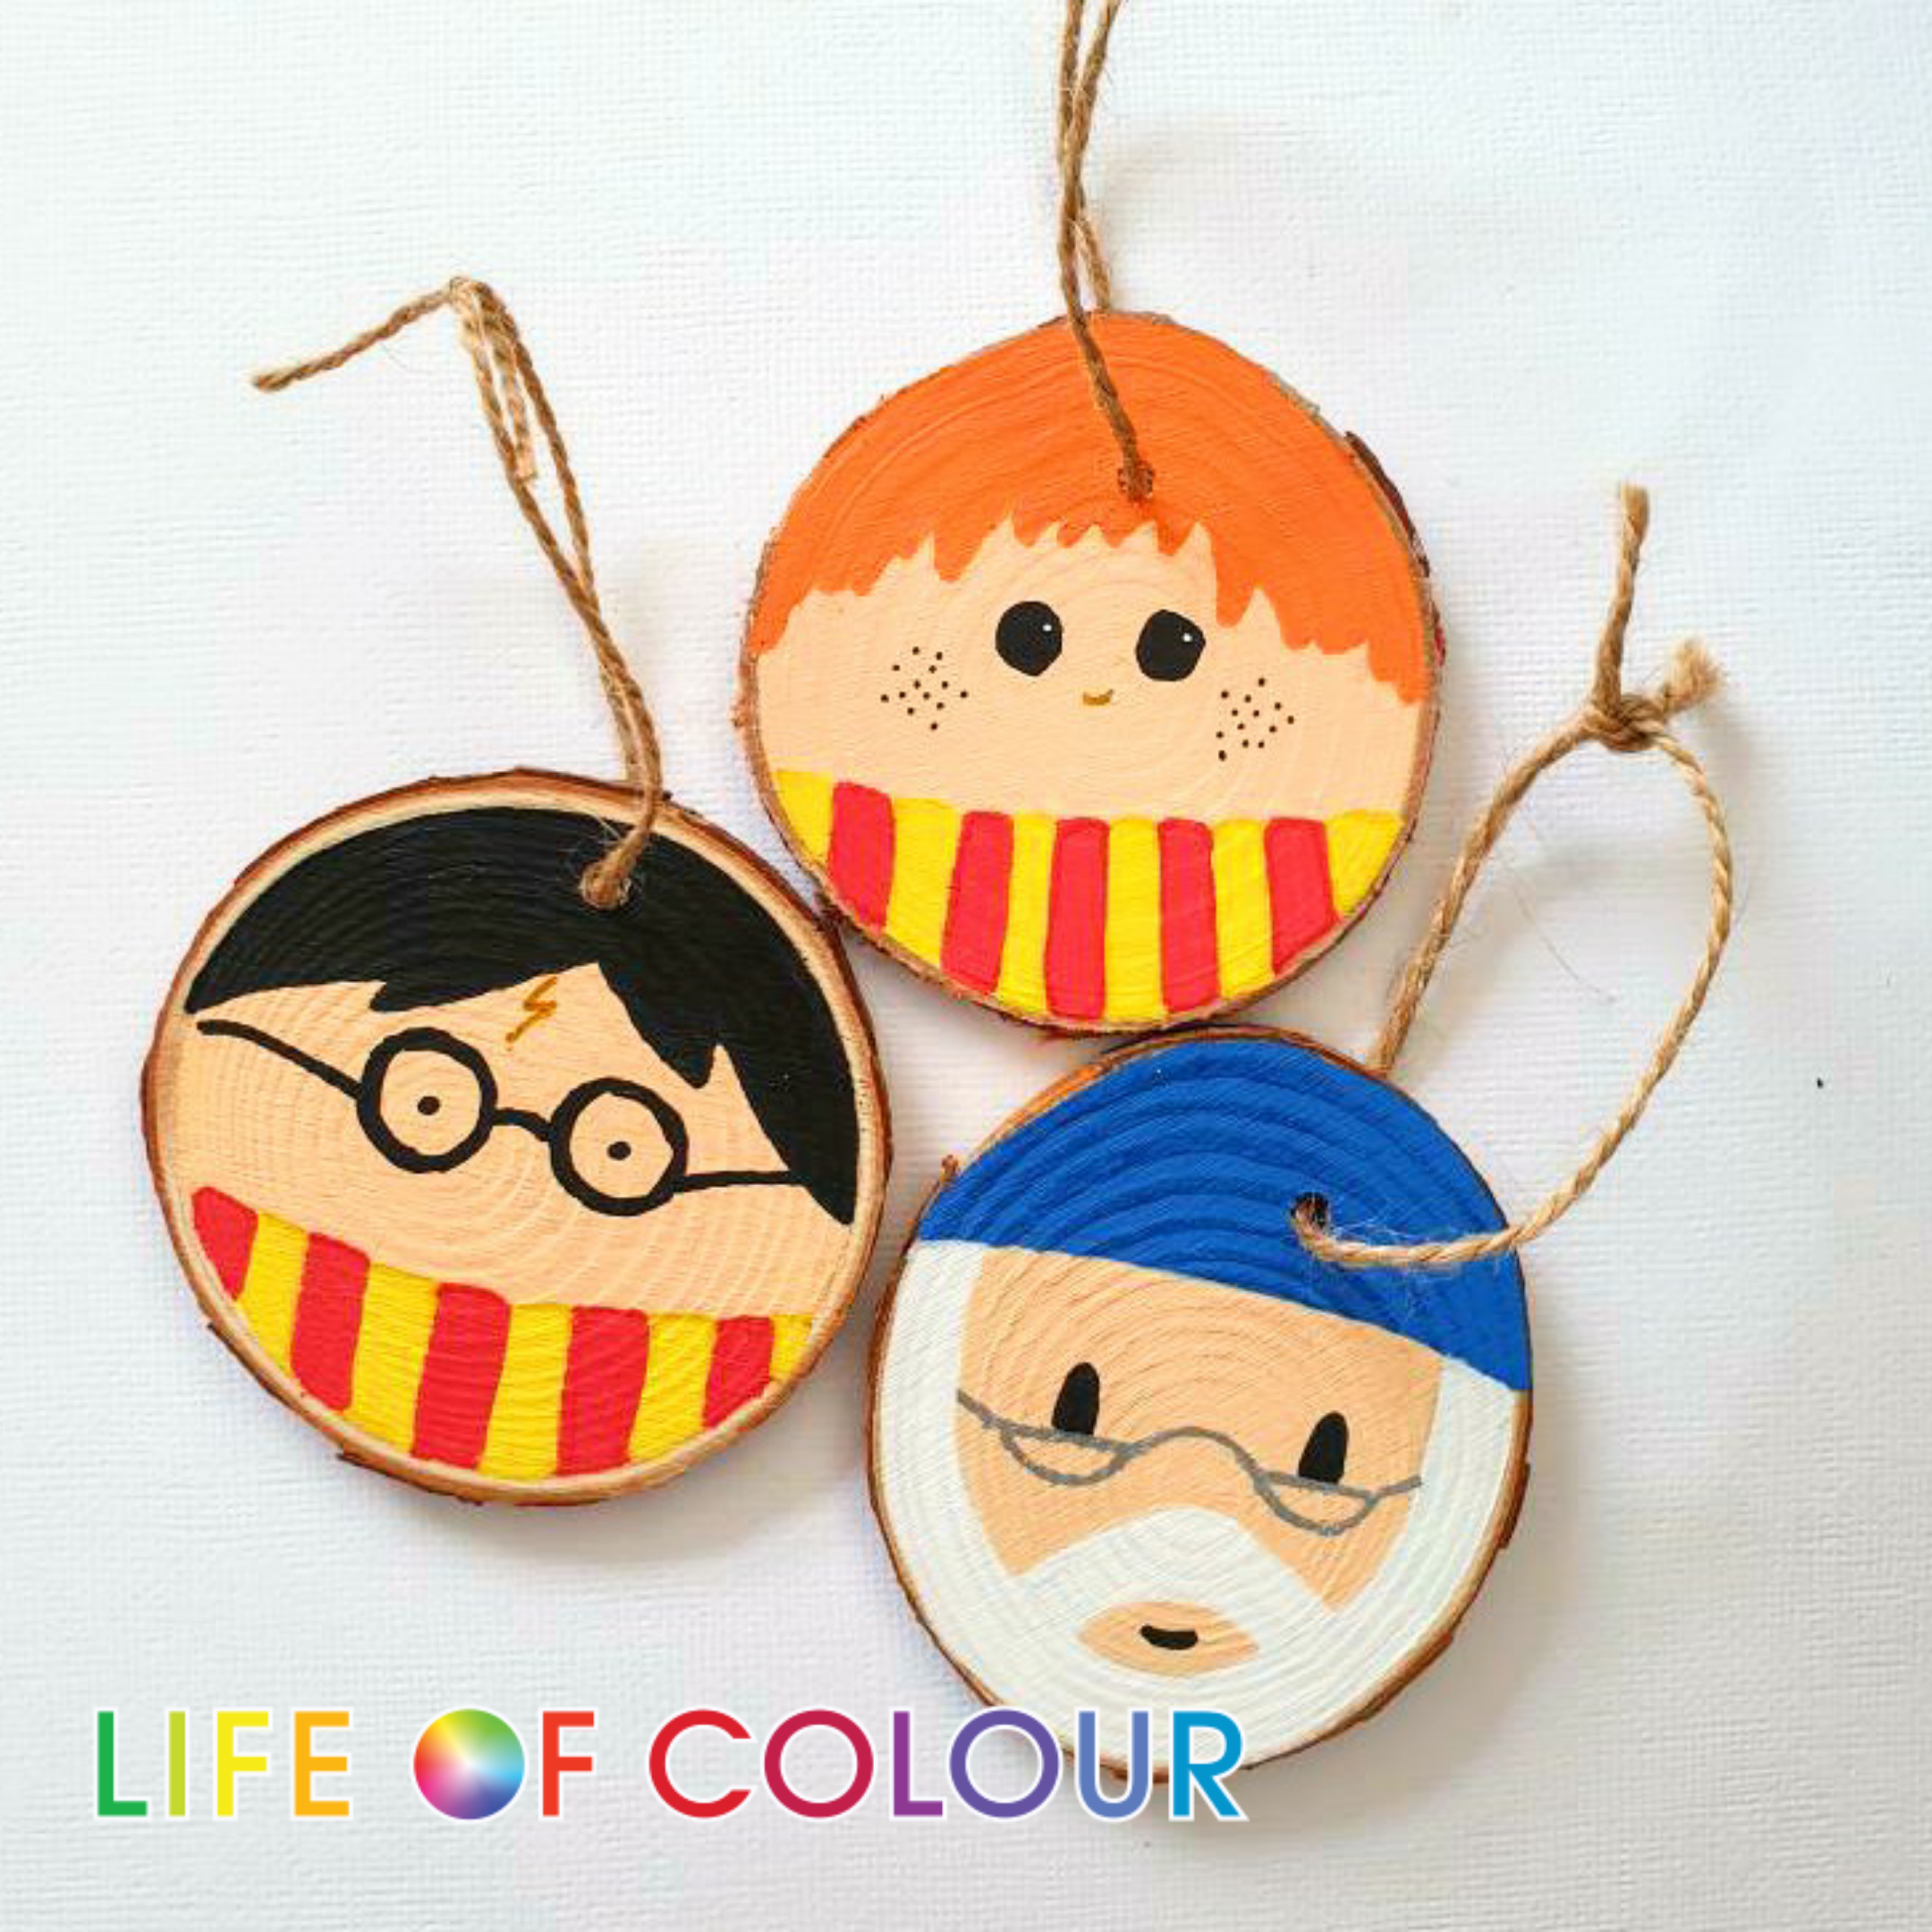 Cute Harry Potter wood slices ornament  Step by step Hogwarts crafts -  Life of Colour